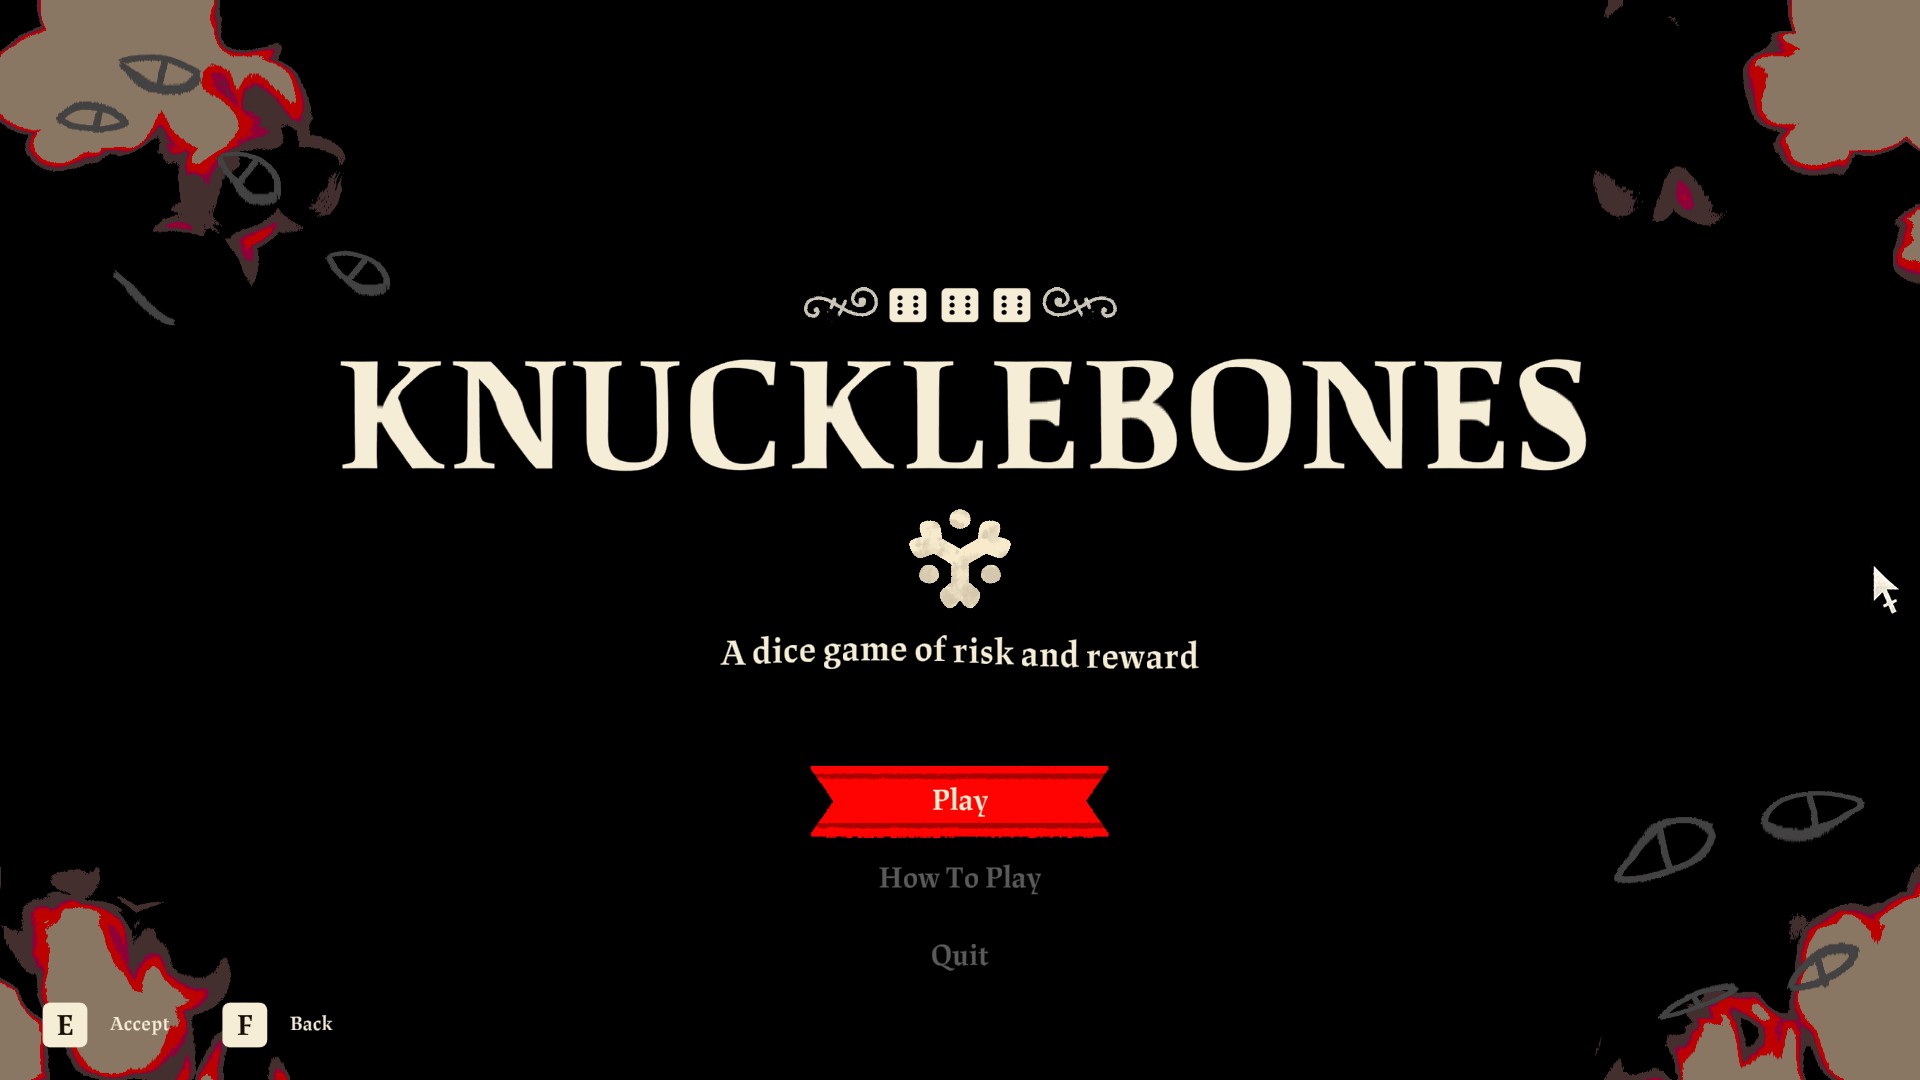 The Knucklebones Title screen with a subtitle that says "A dice game of risk and reward"